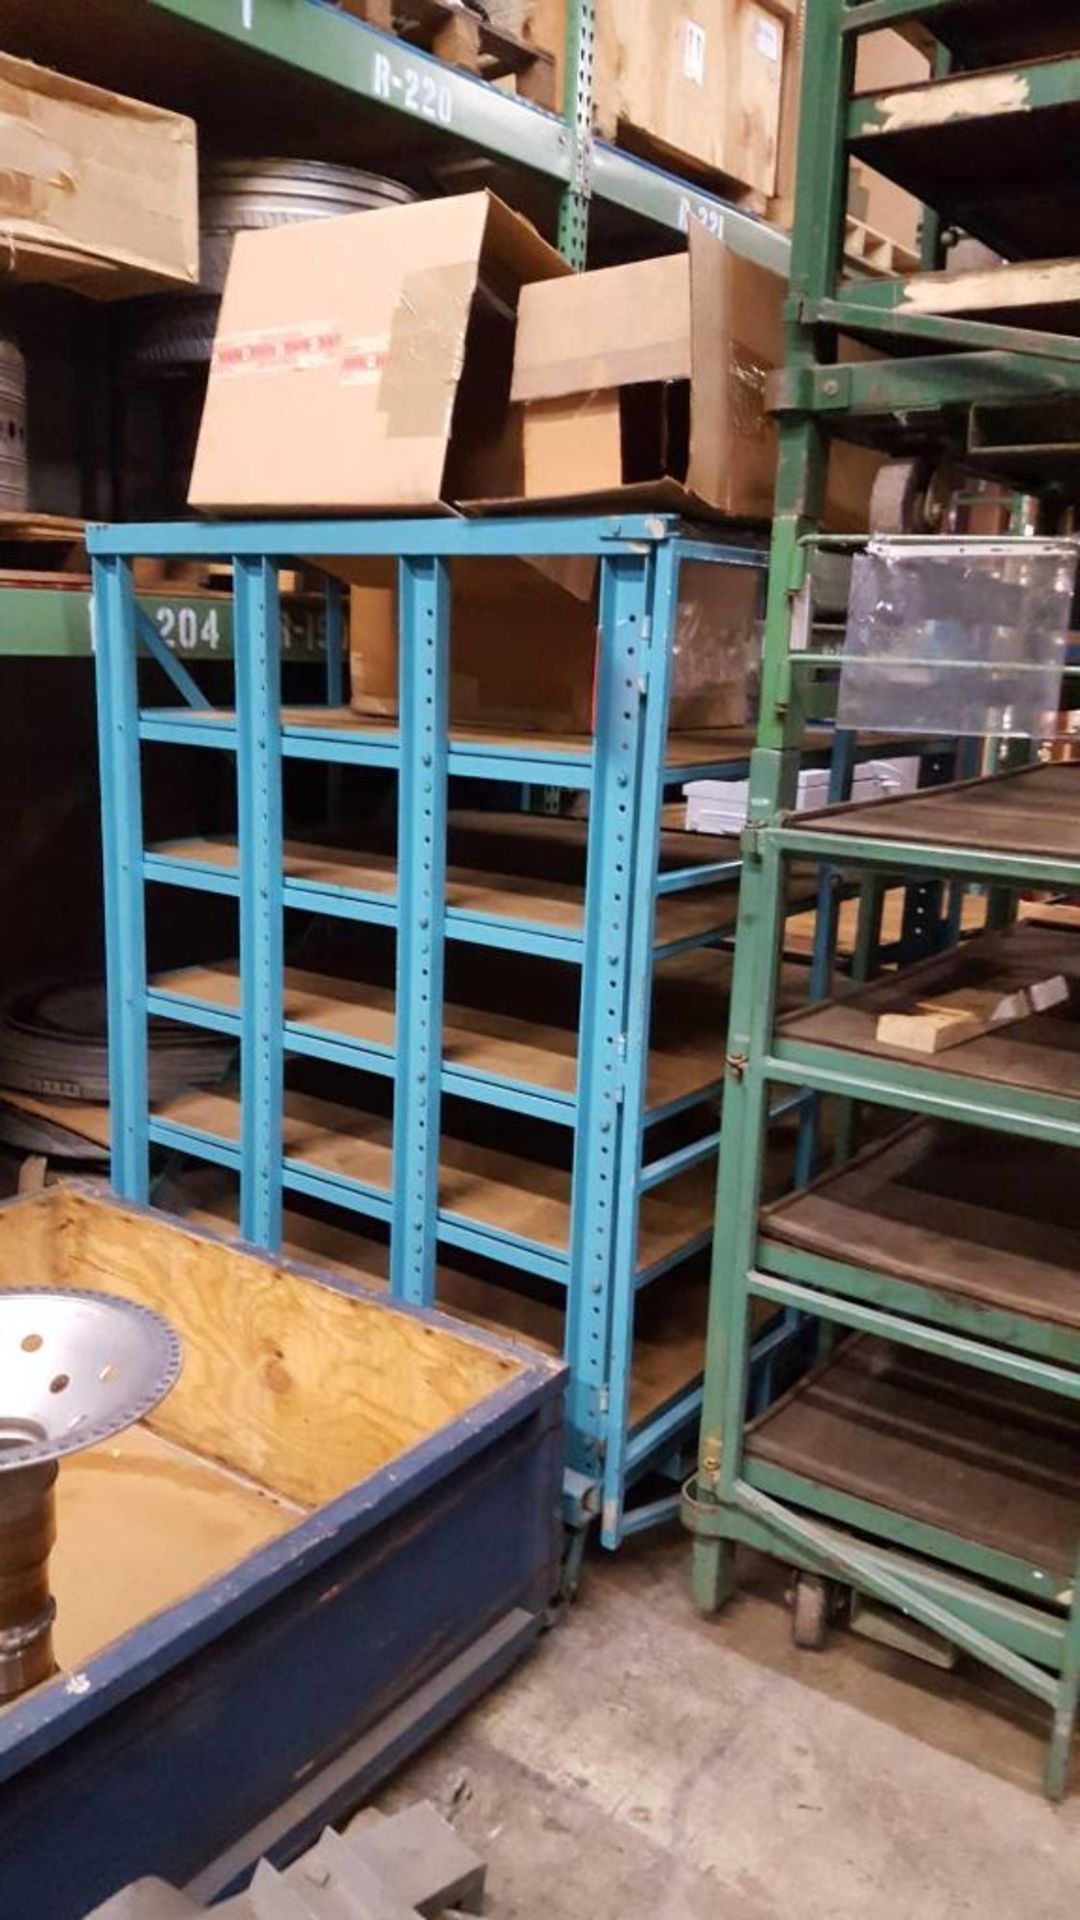 Lot of (2) assorted portable shop carts, 4' x 4' x 6' X 5 tier with slide out shelves - no contents - Image 2 of 2